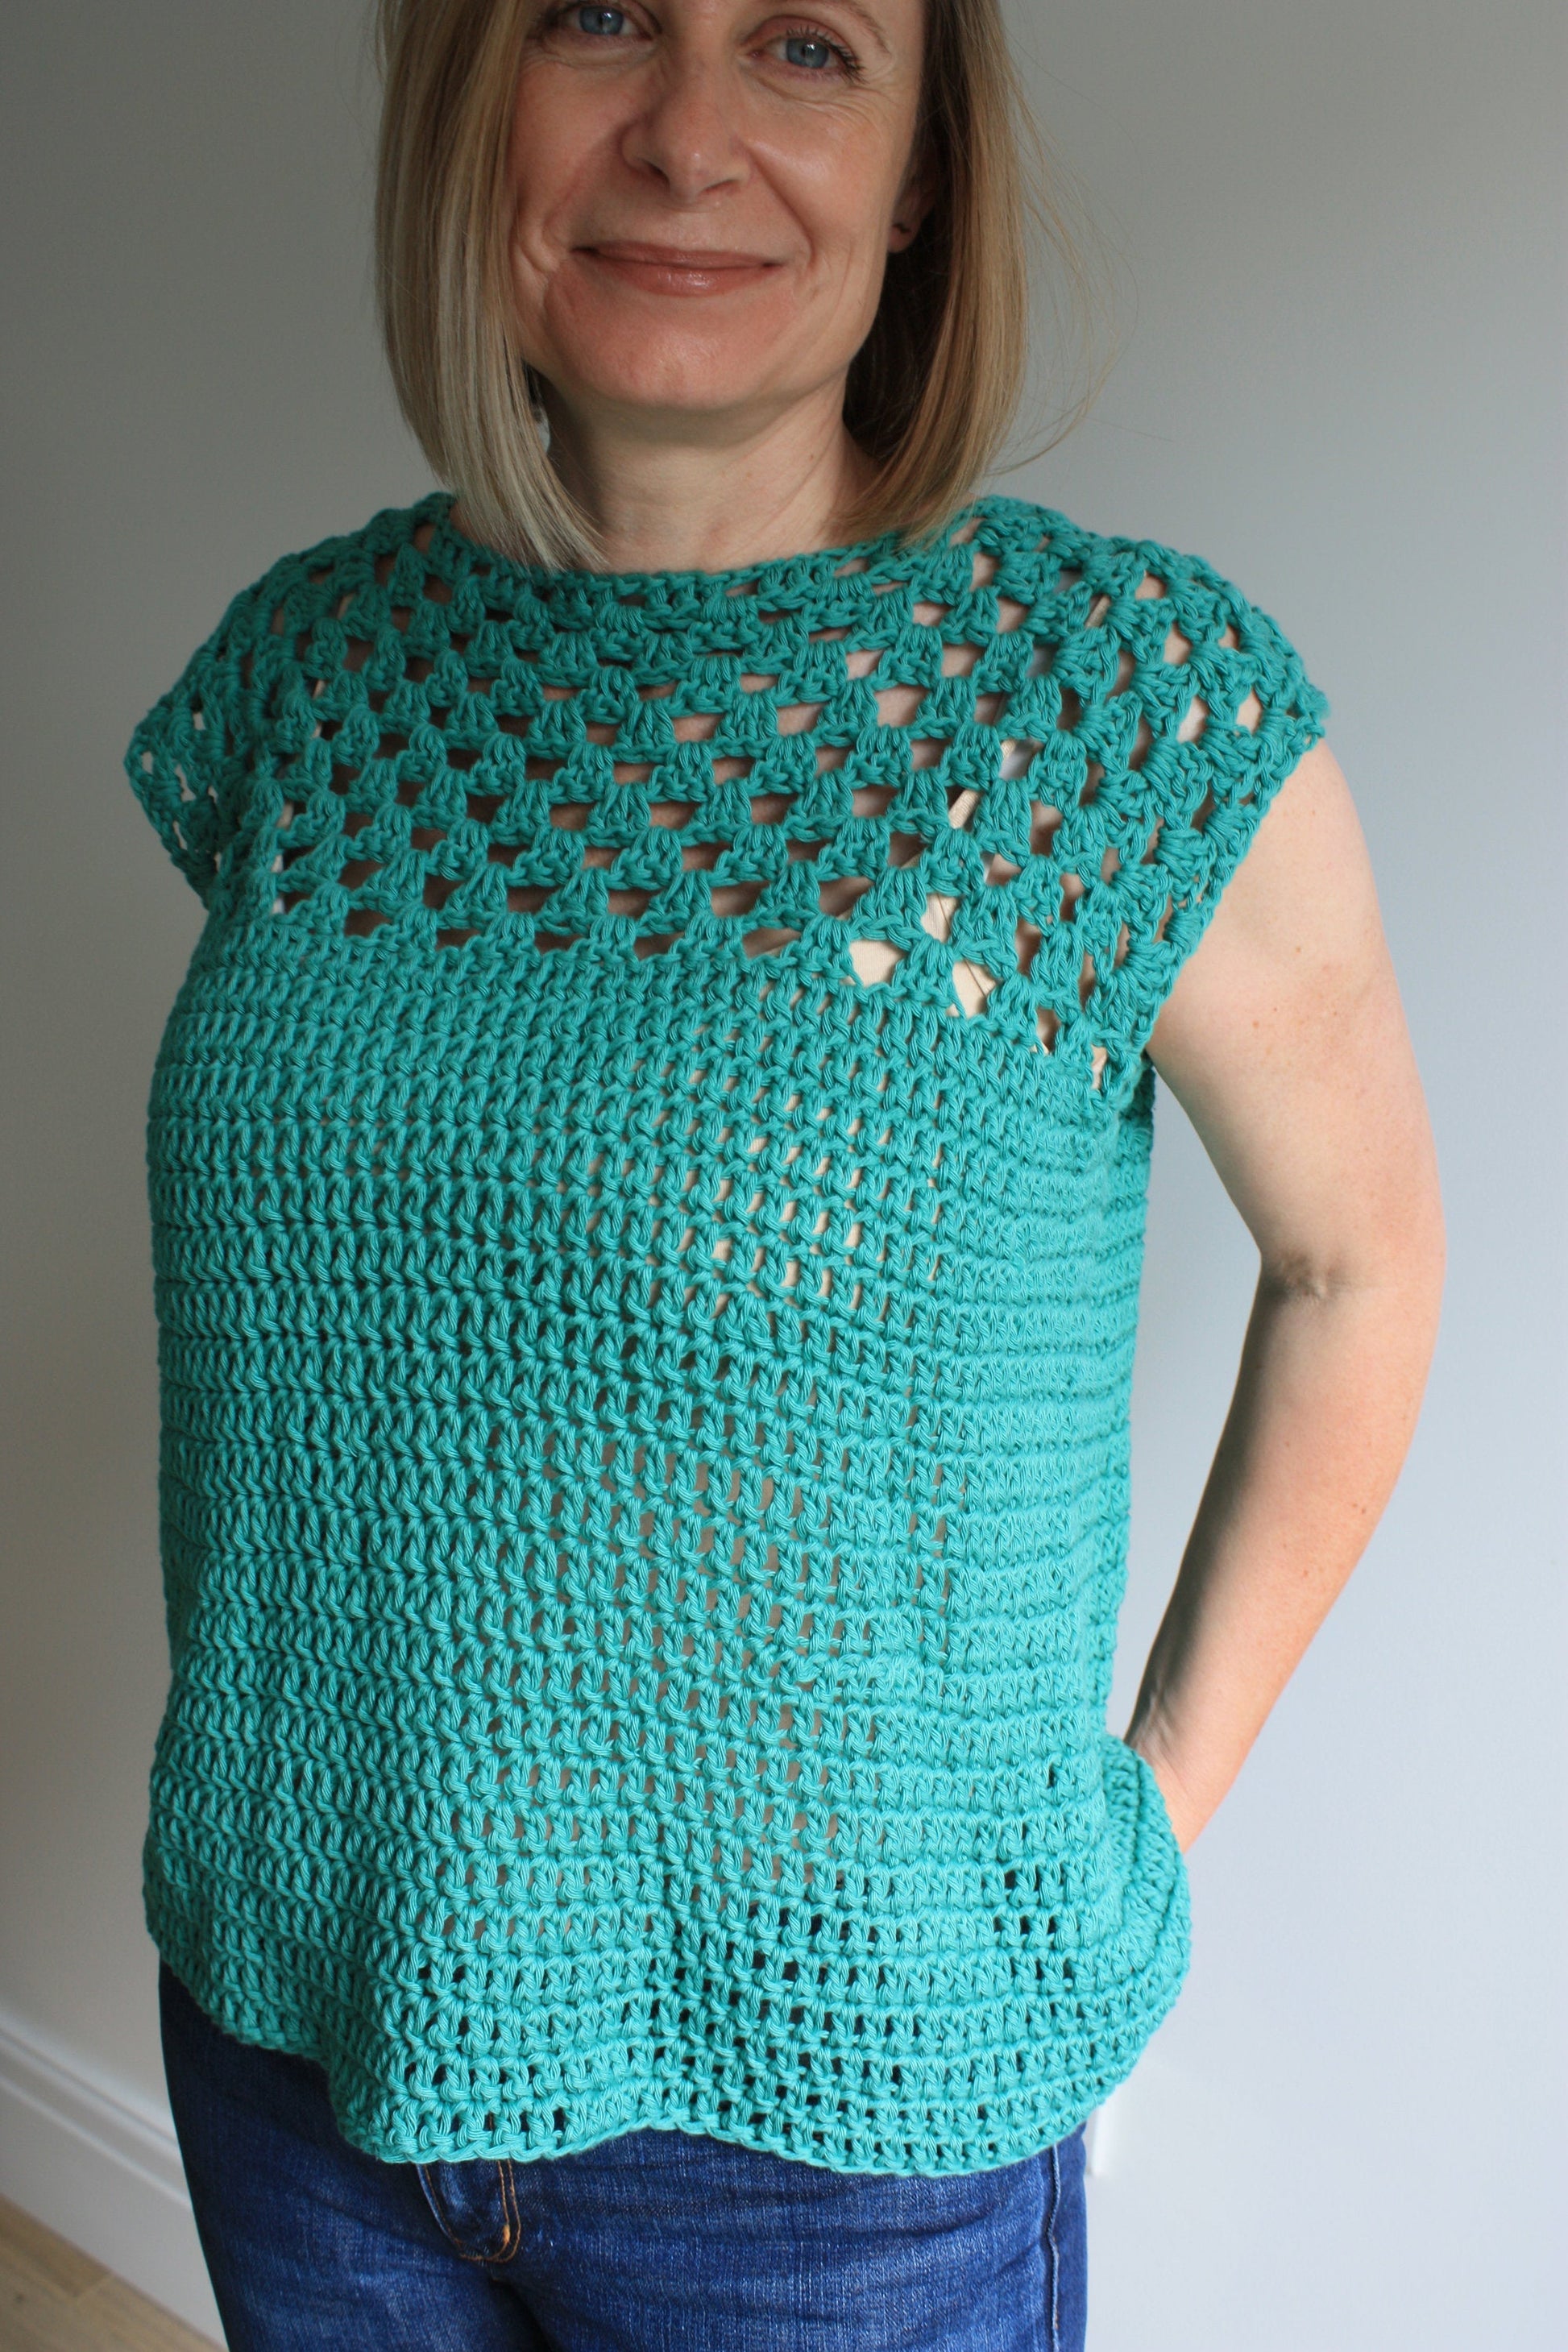 Crochet Kit, Crop top, to Knit with Crochet